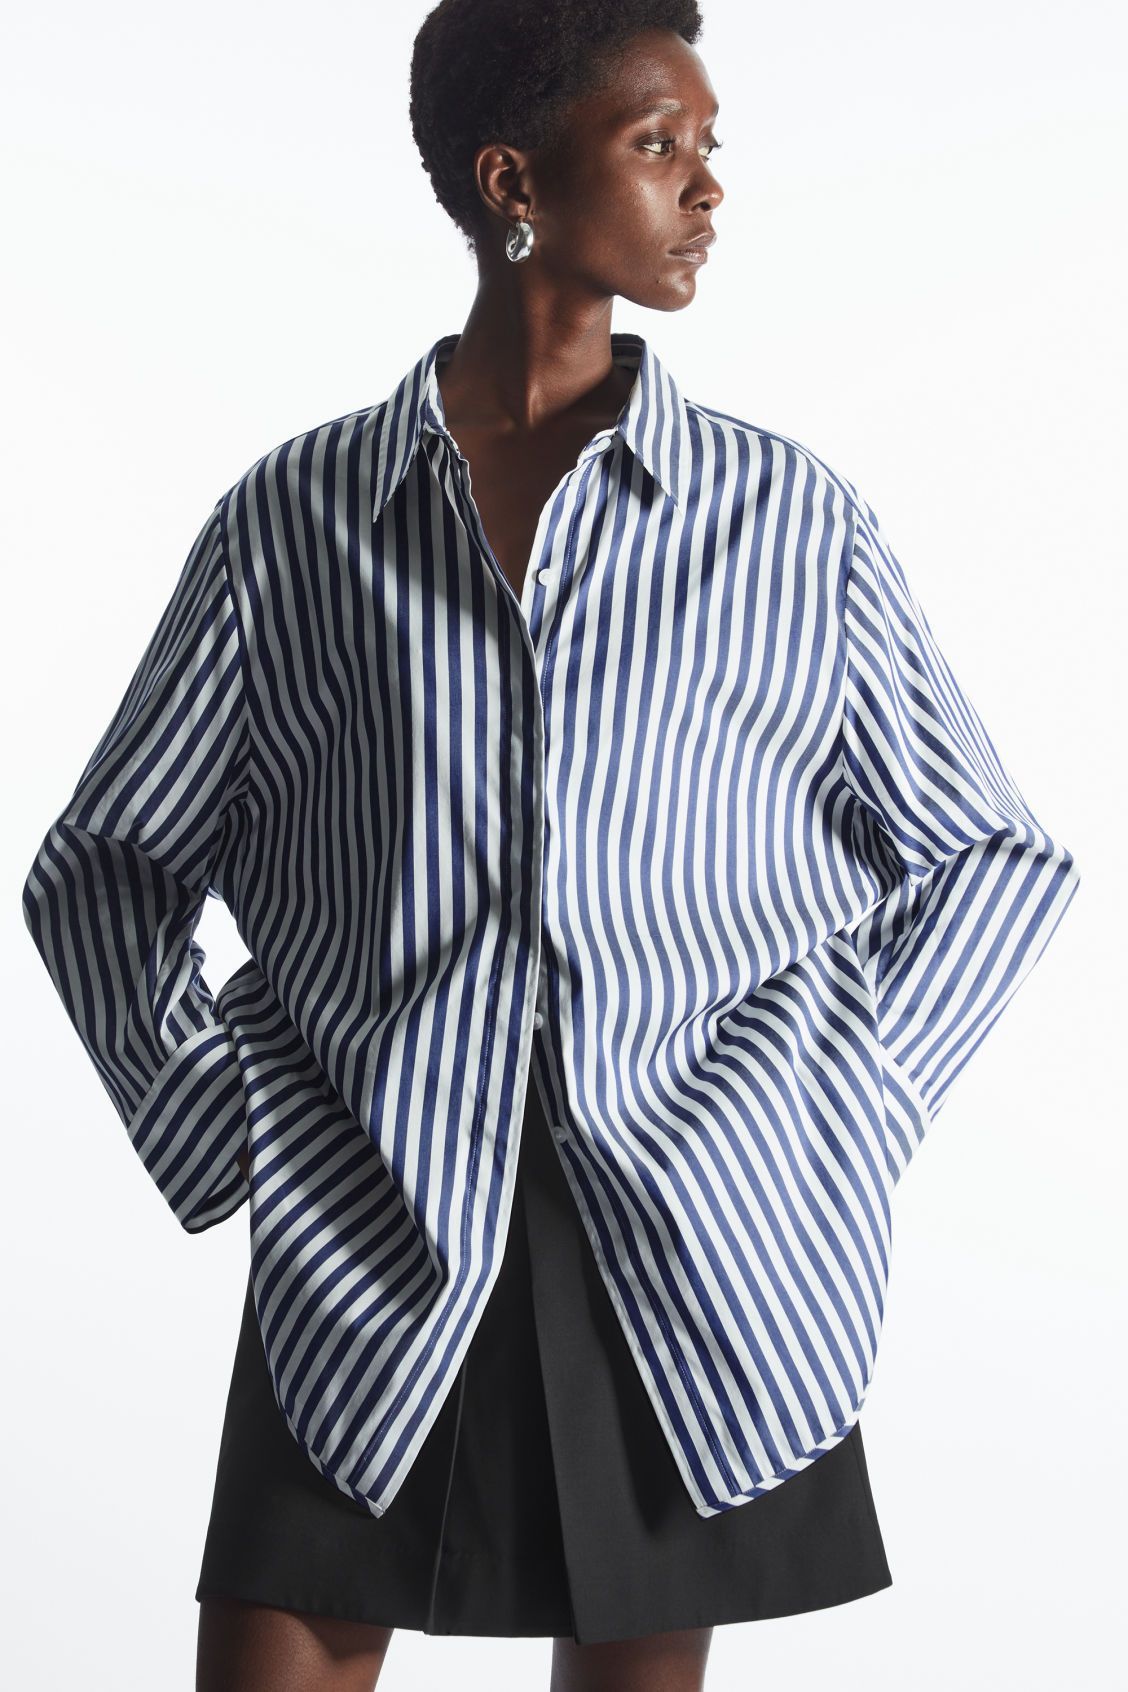 Best striped shirts for women: 11 striped blouses to shop now